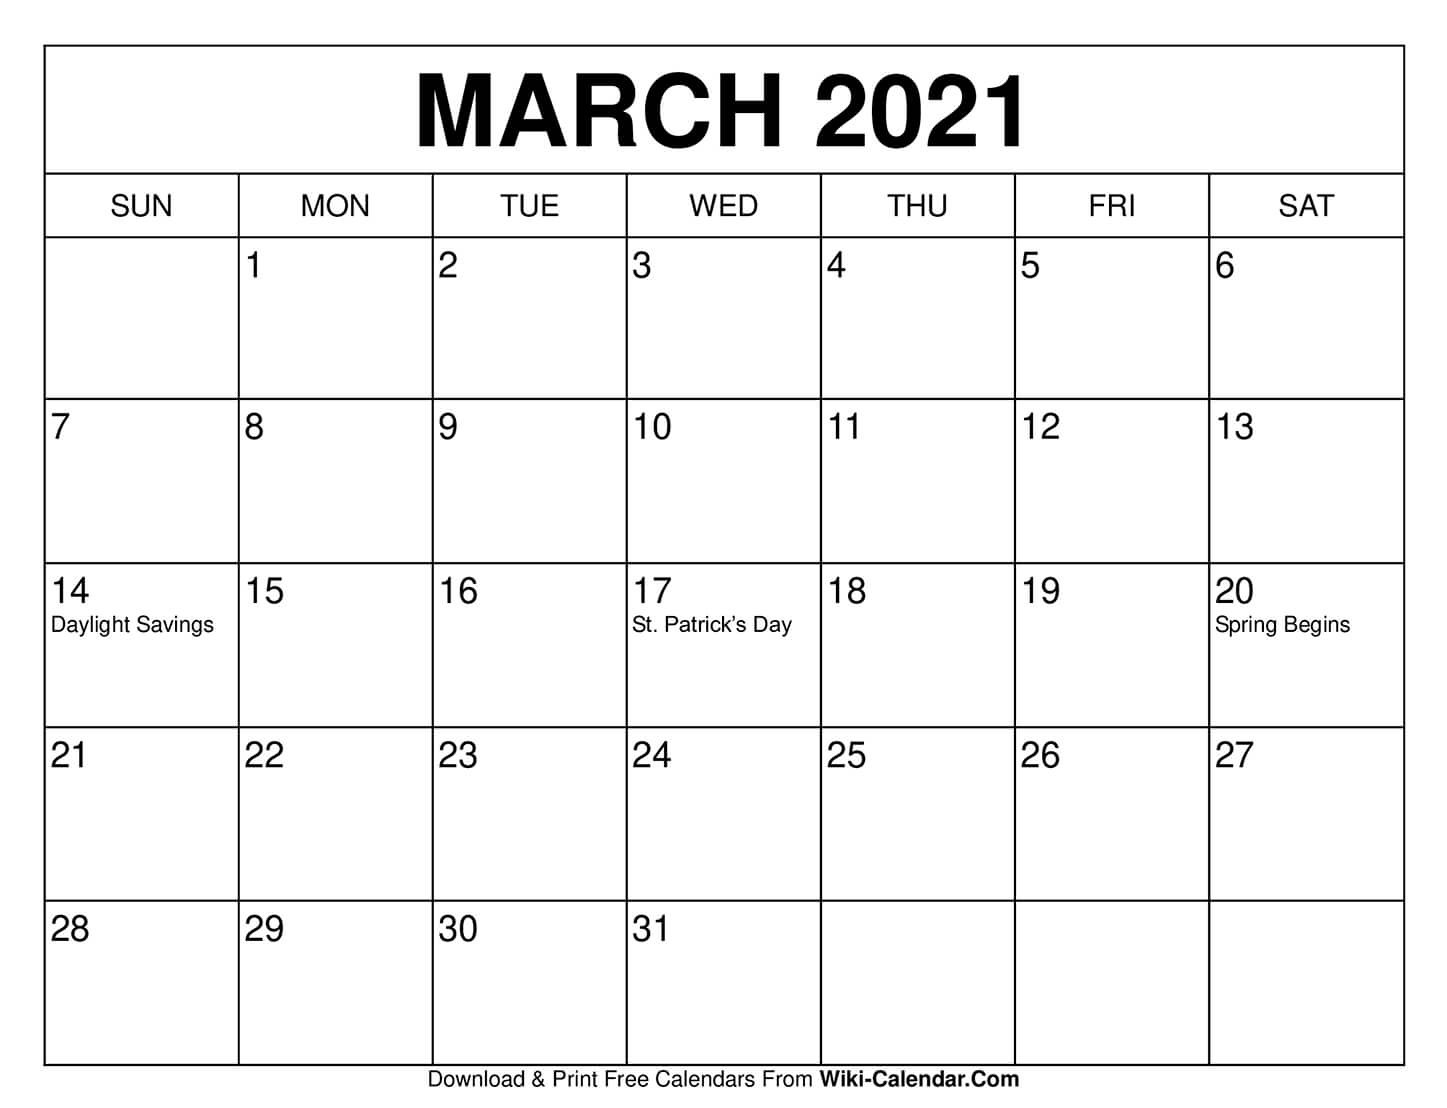 Free Printable March 2021 Calendars  Free Printable Monthly Calendar March 2021